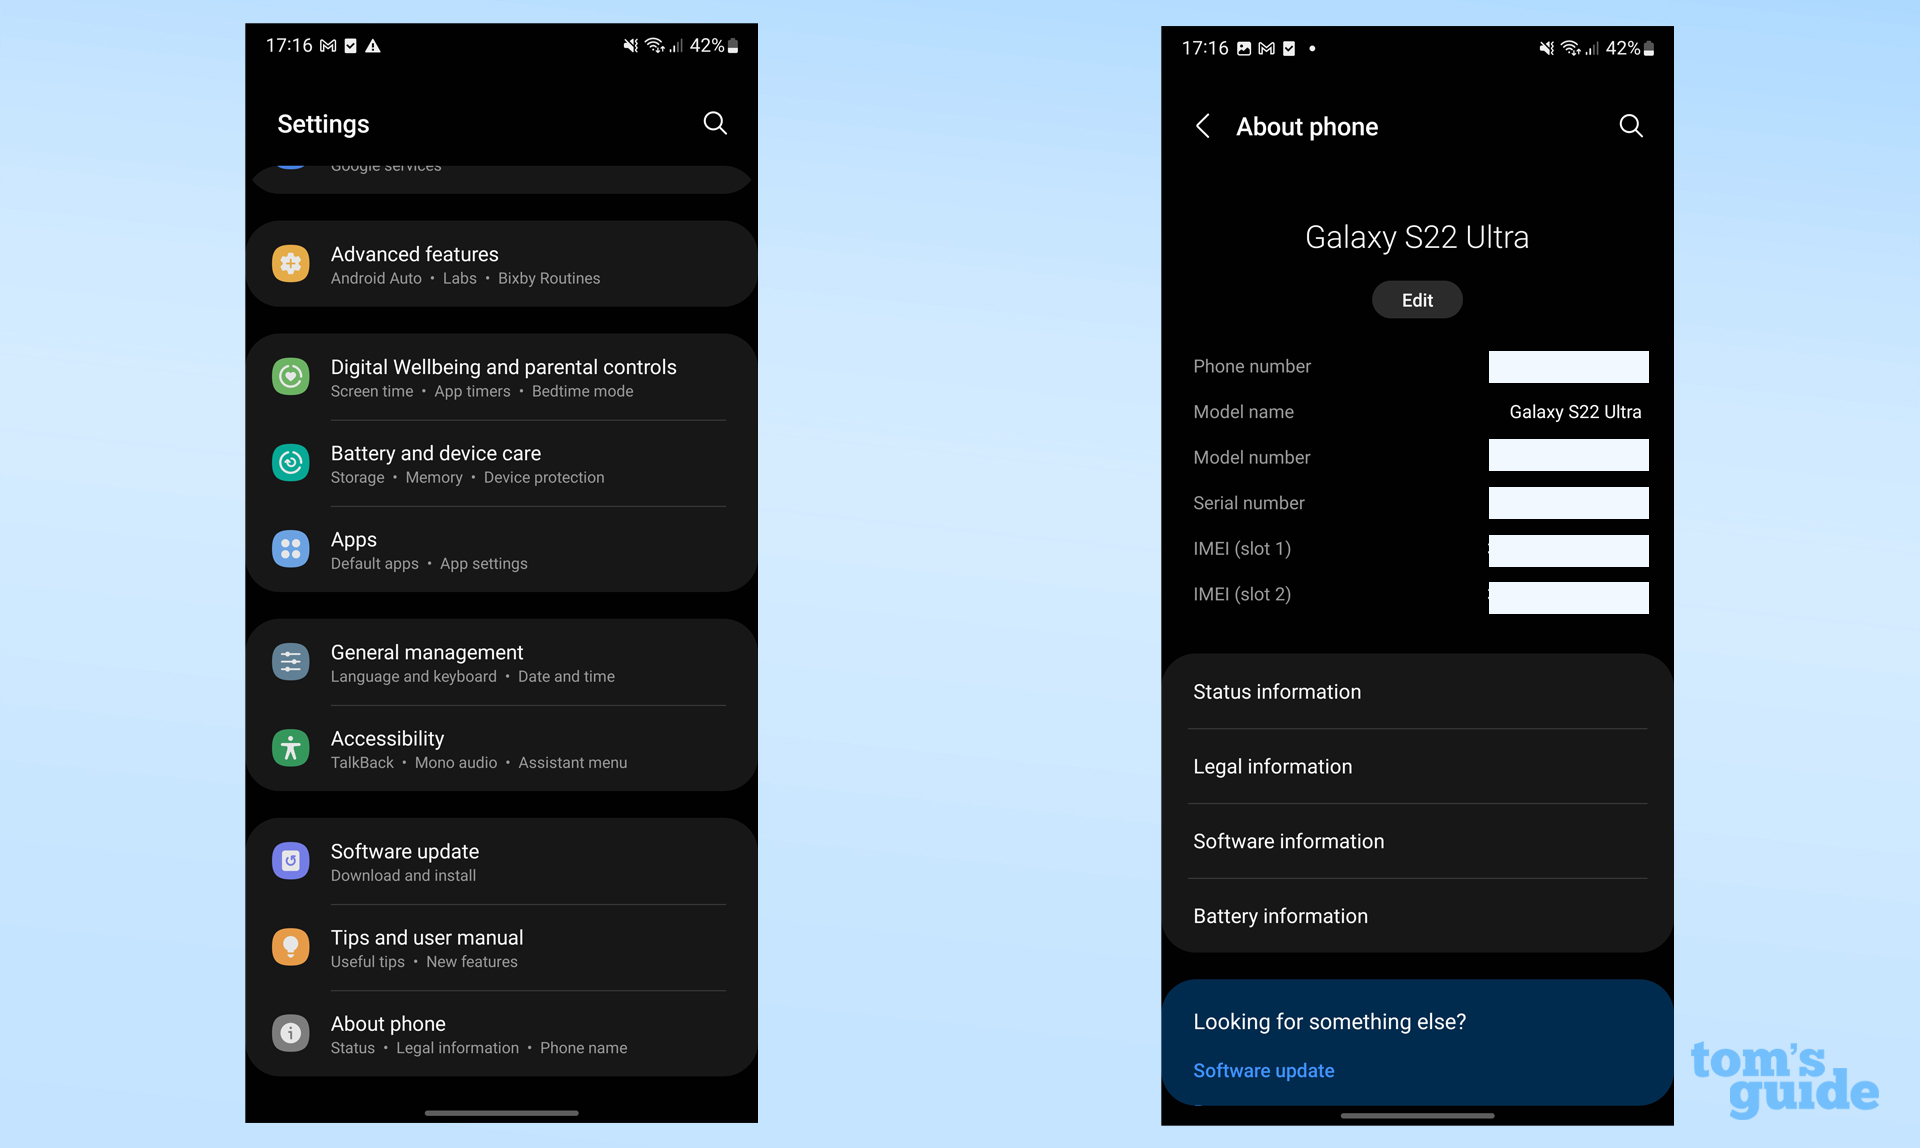 Screenshots of the Samsung Galaxy S22 Ultra, showing where to find the IMEI number in the Settings app